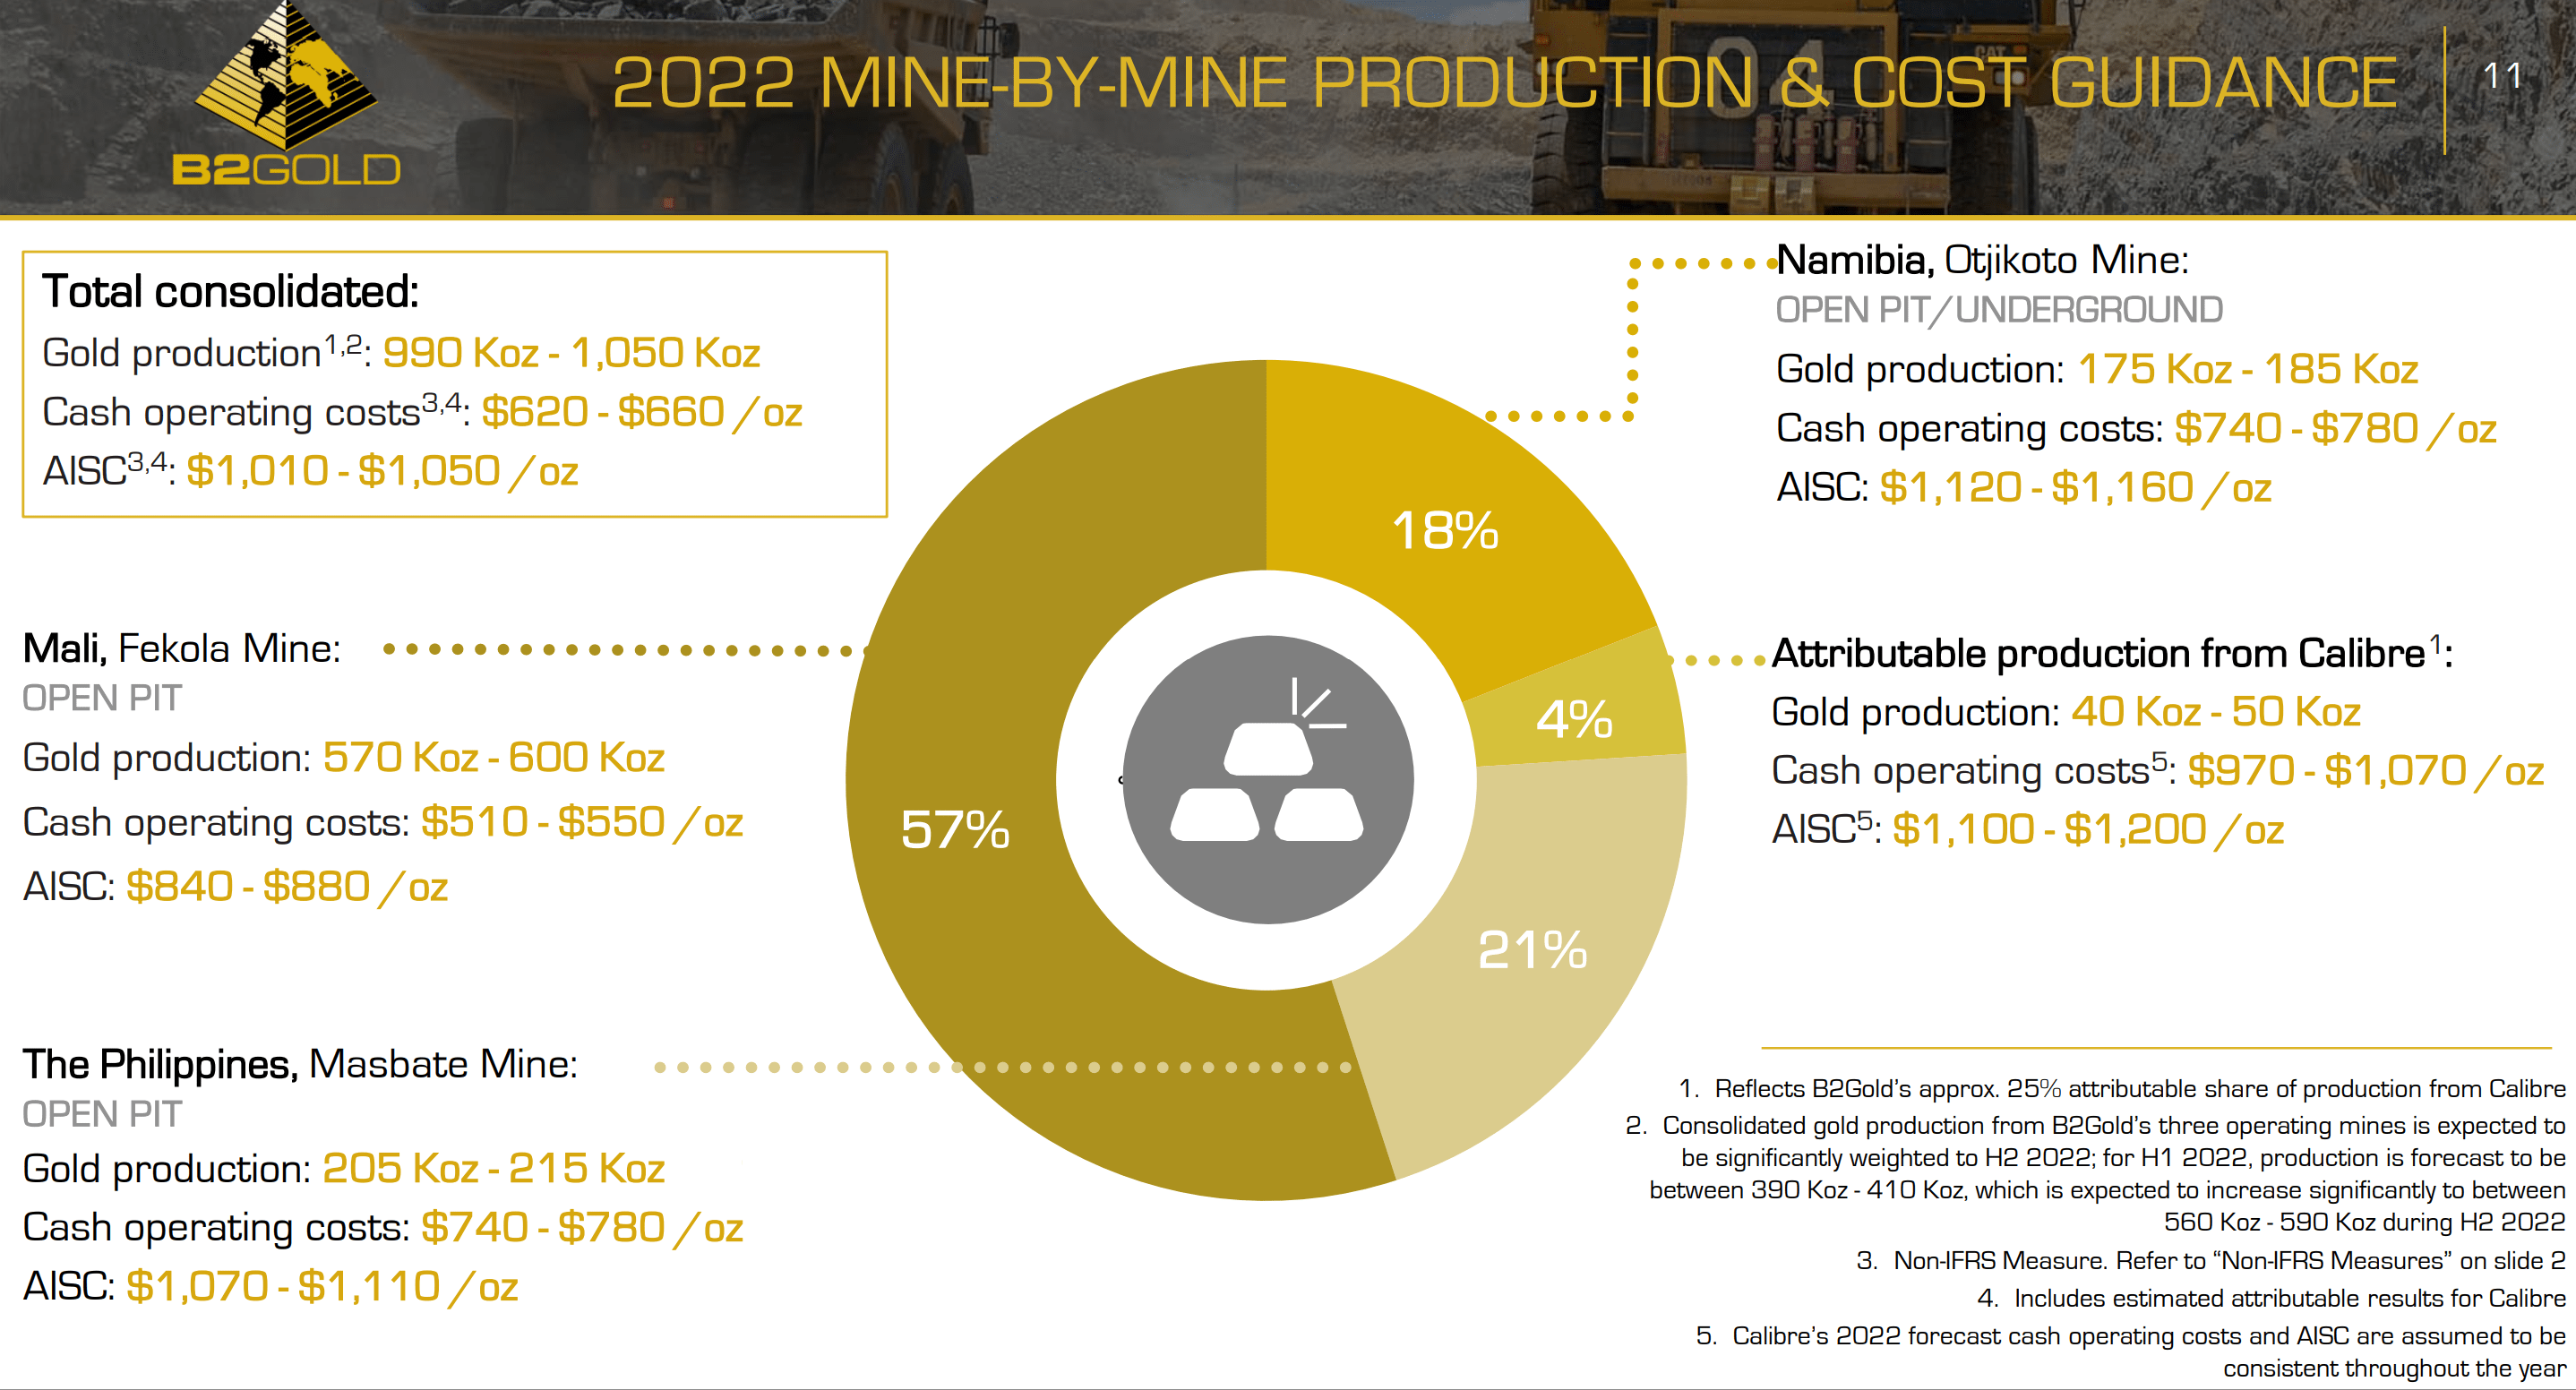 B2Gold - A Low-Cost International Senior Gold Producer